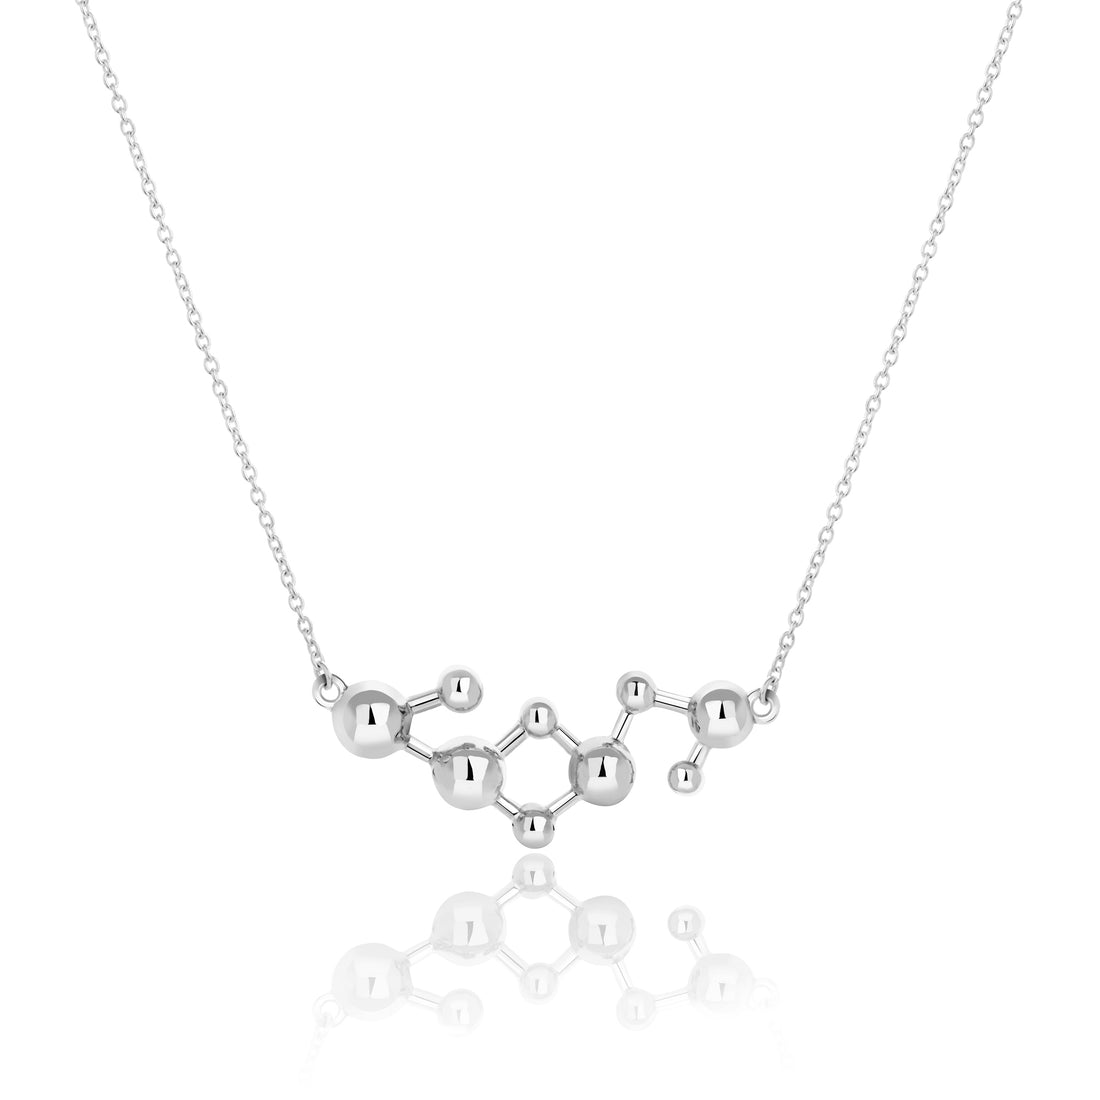 Silver Atomic Sphere Necklace